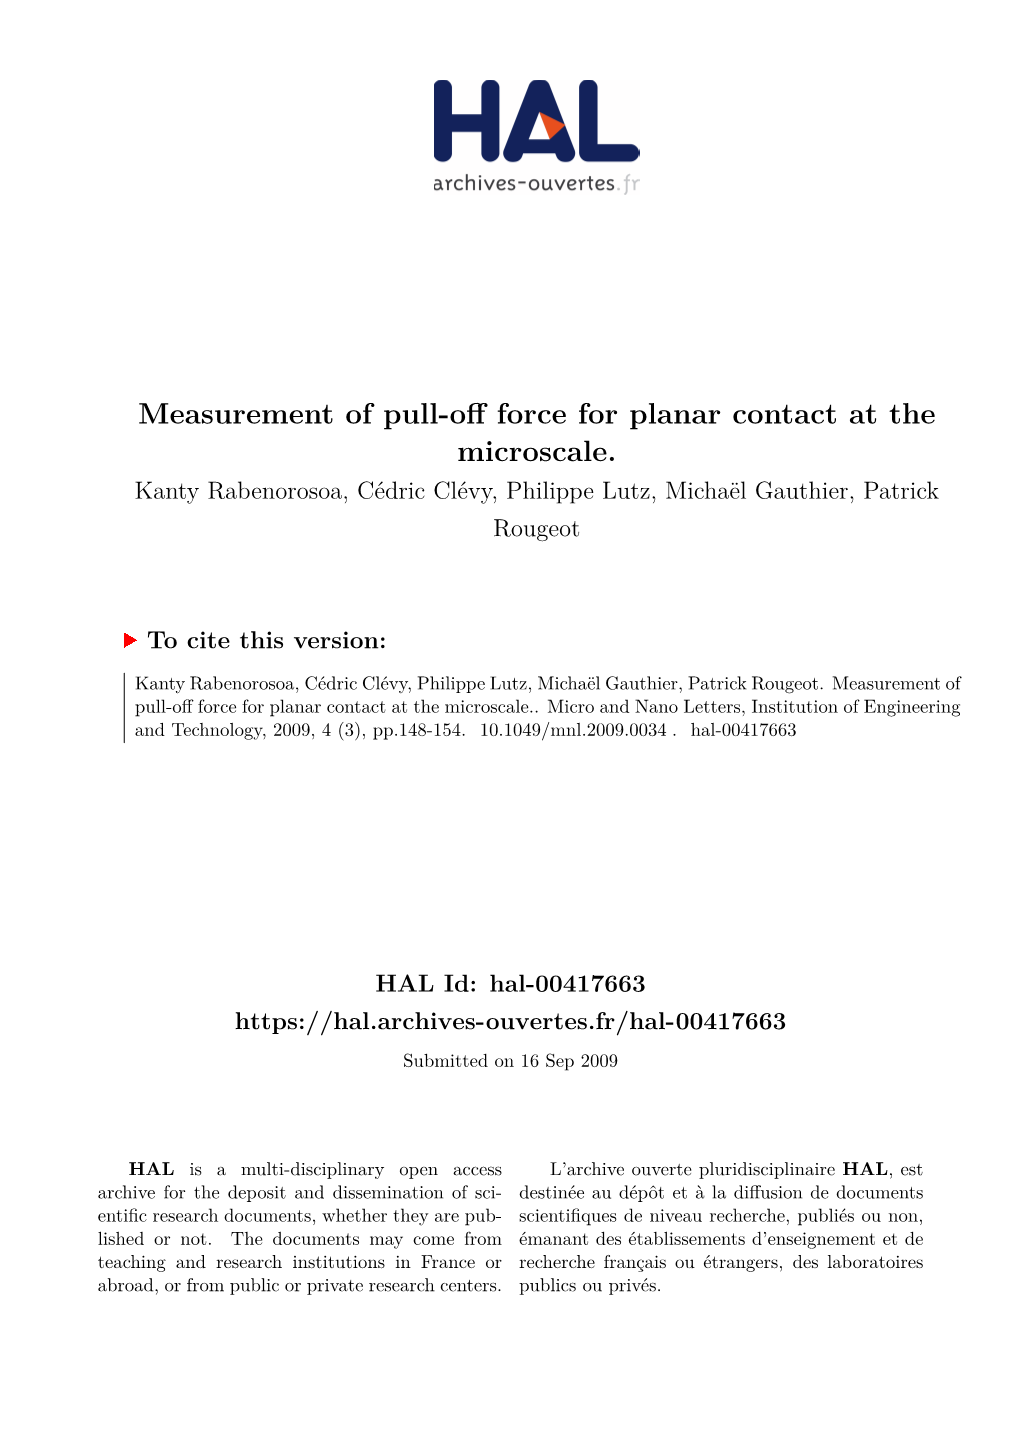 Measurement of Pull-Off Force for Planar Contact at the Microscale. Kanty Rabenorosoa, Cédric Clévy, Philippe Lutz, Michaël Gauthier, Patrick Rougeot